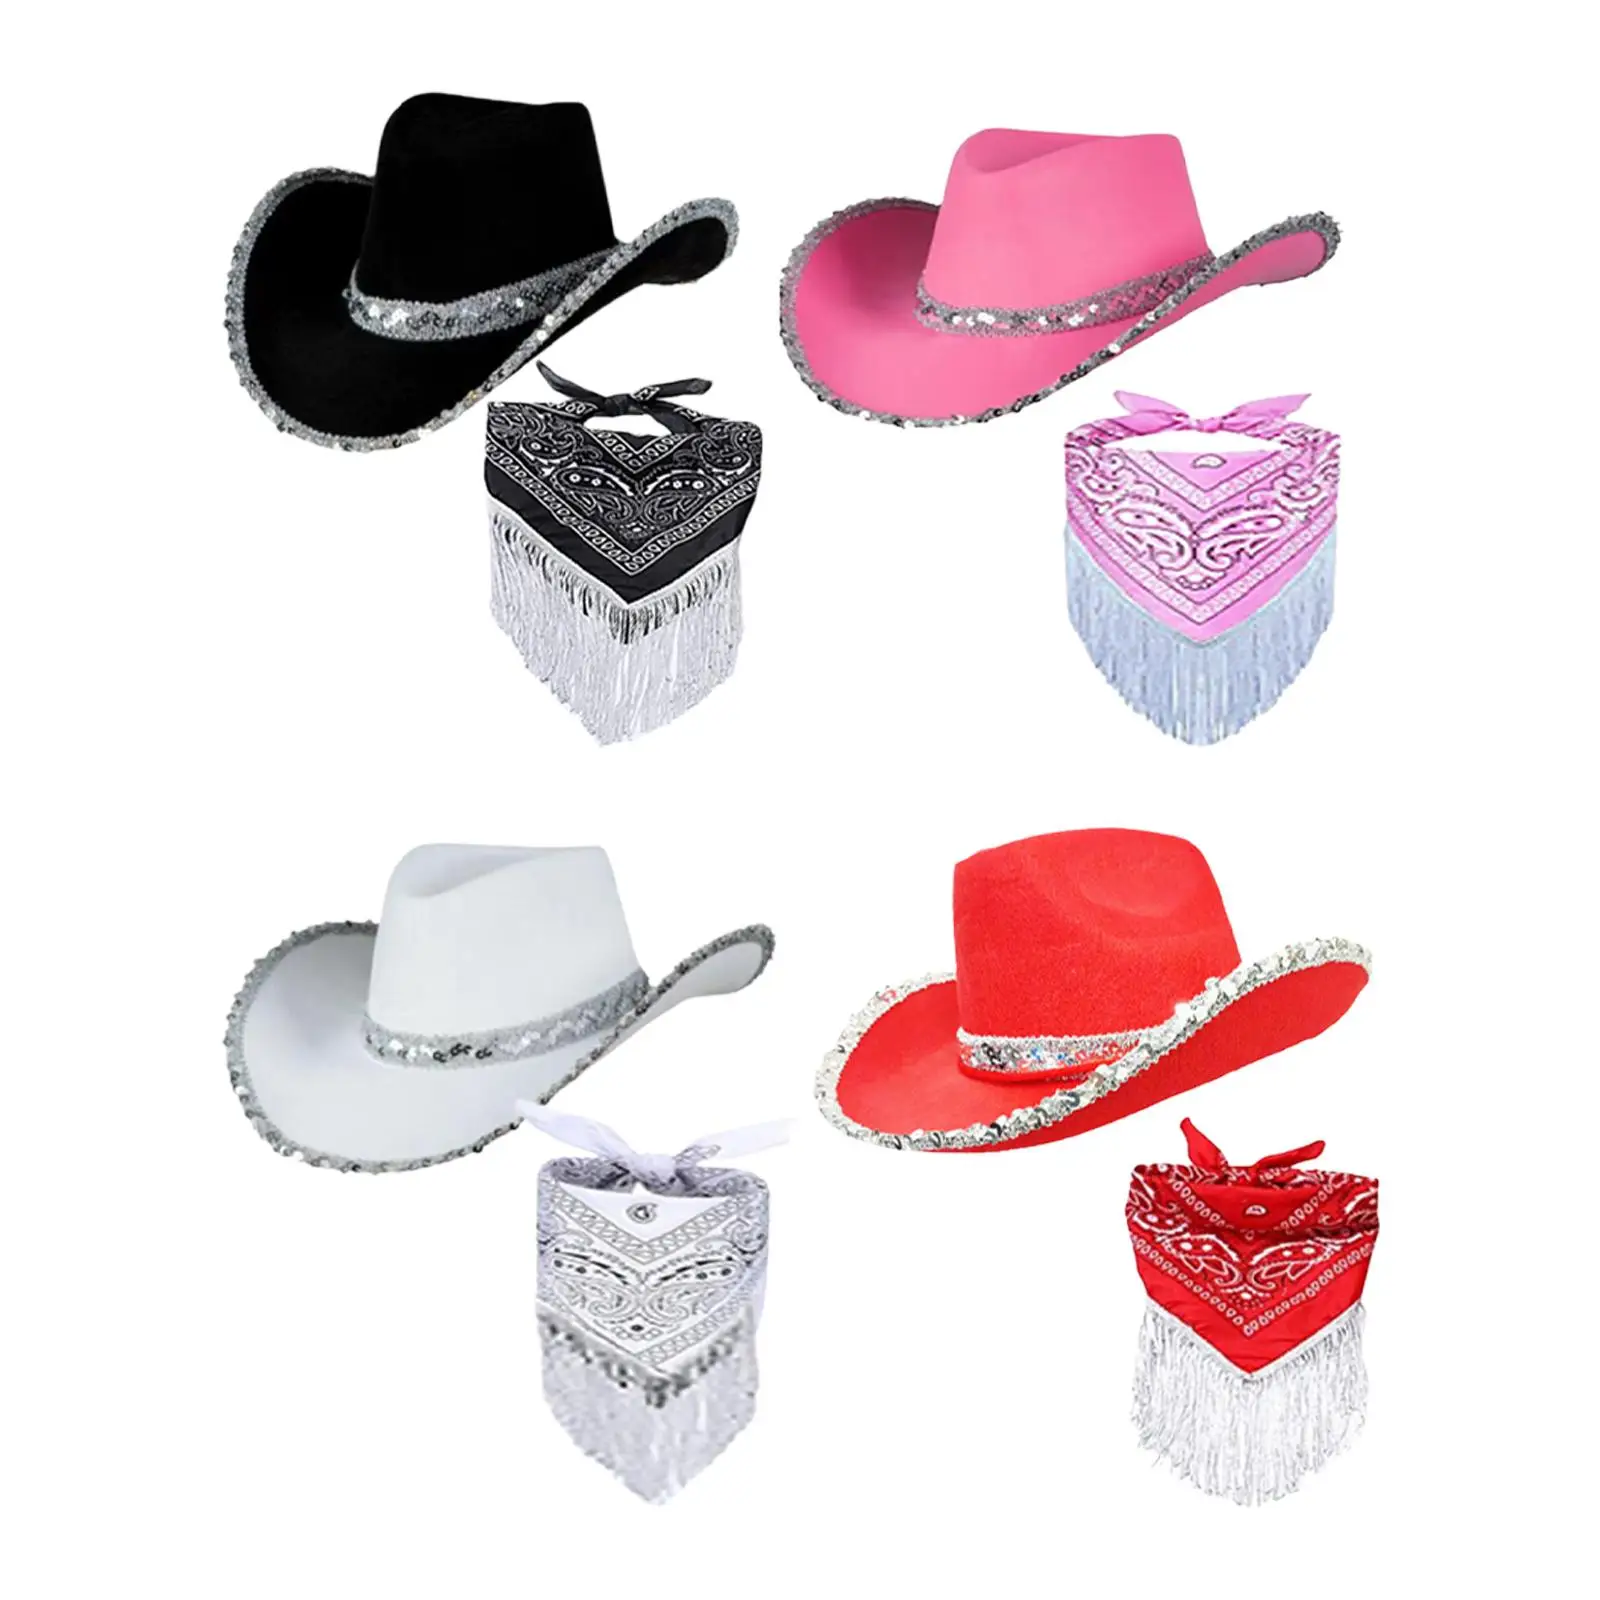 Cowboy Hat with Fringed Bandana Paisley Head Wrap Scarf Felt Cowgirl Hat for Music Festival Concert West Party Cosplay Costume